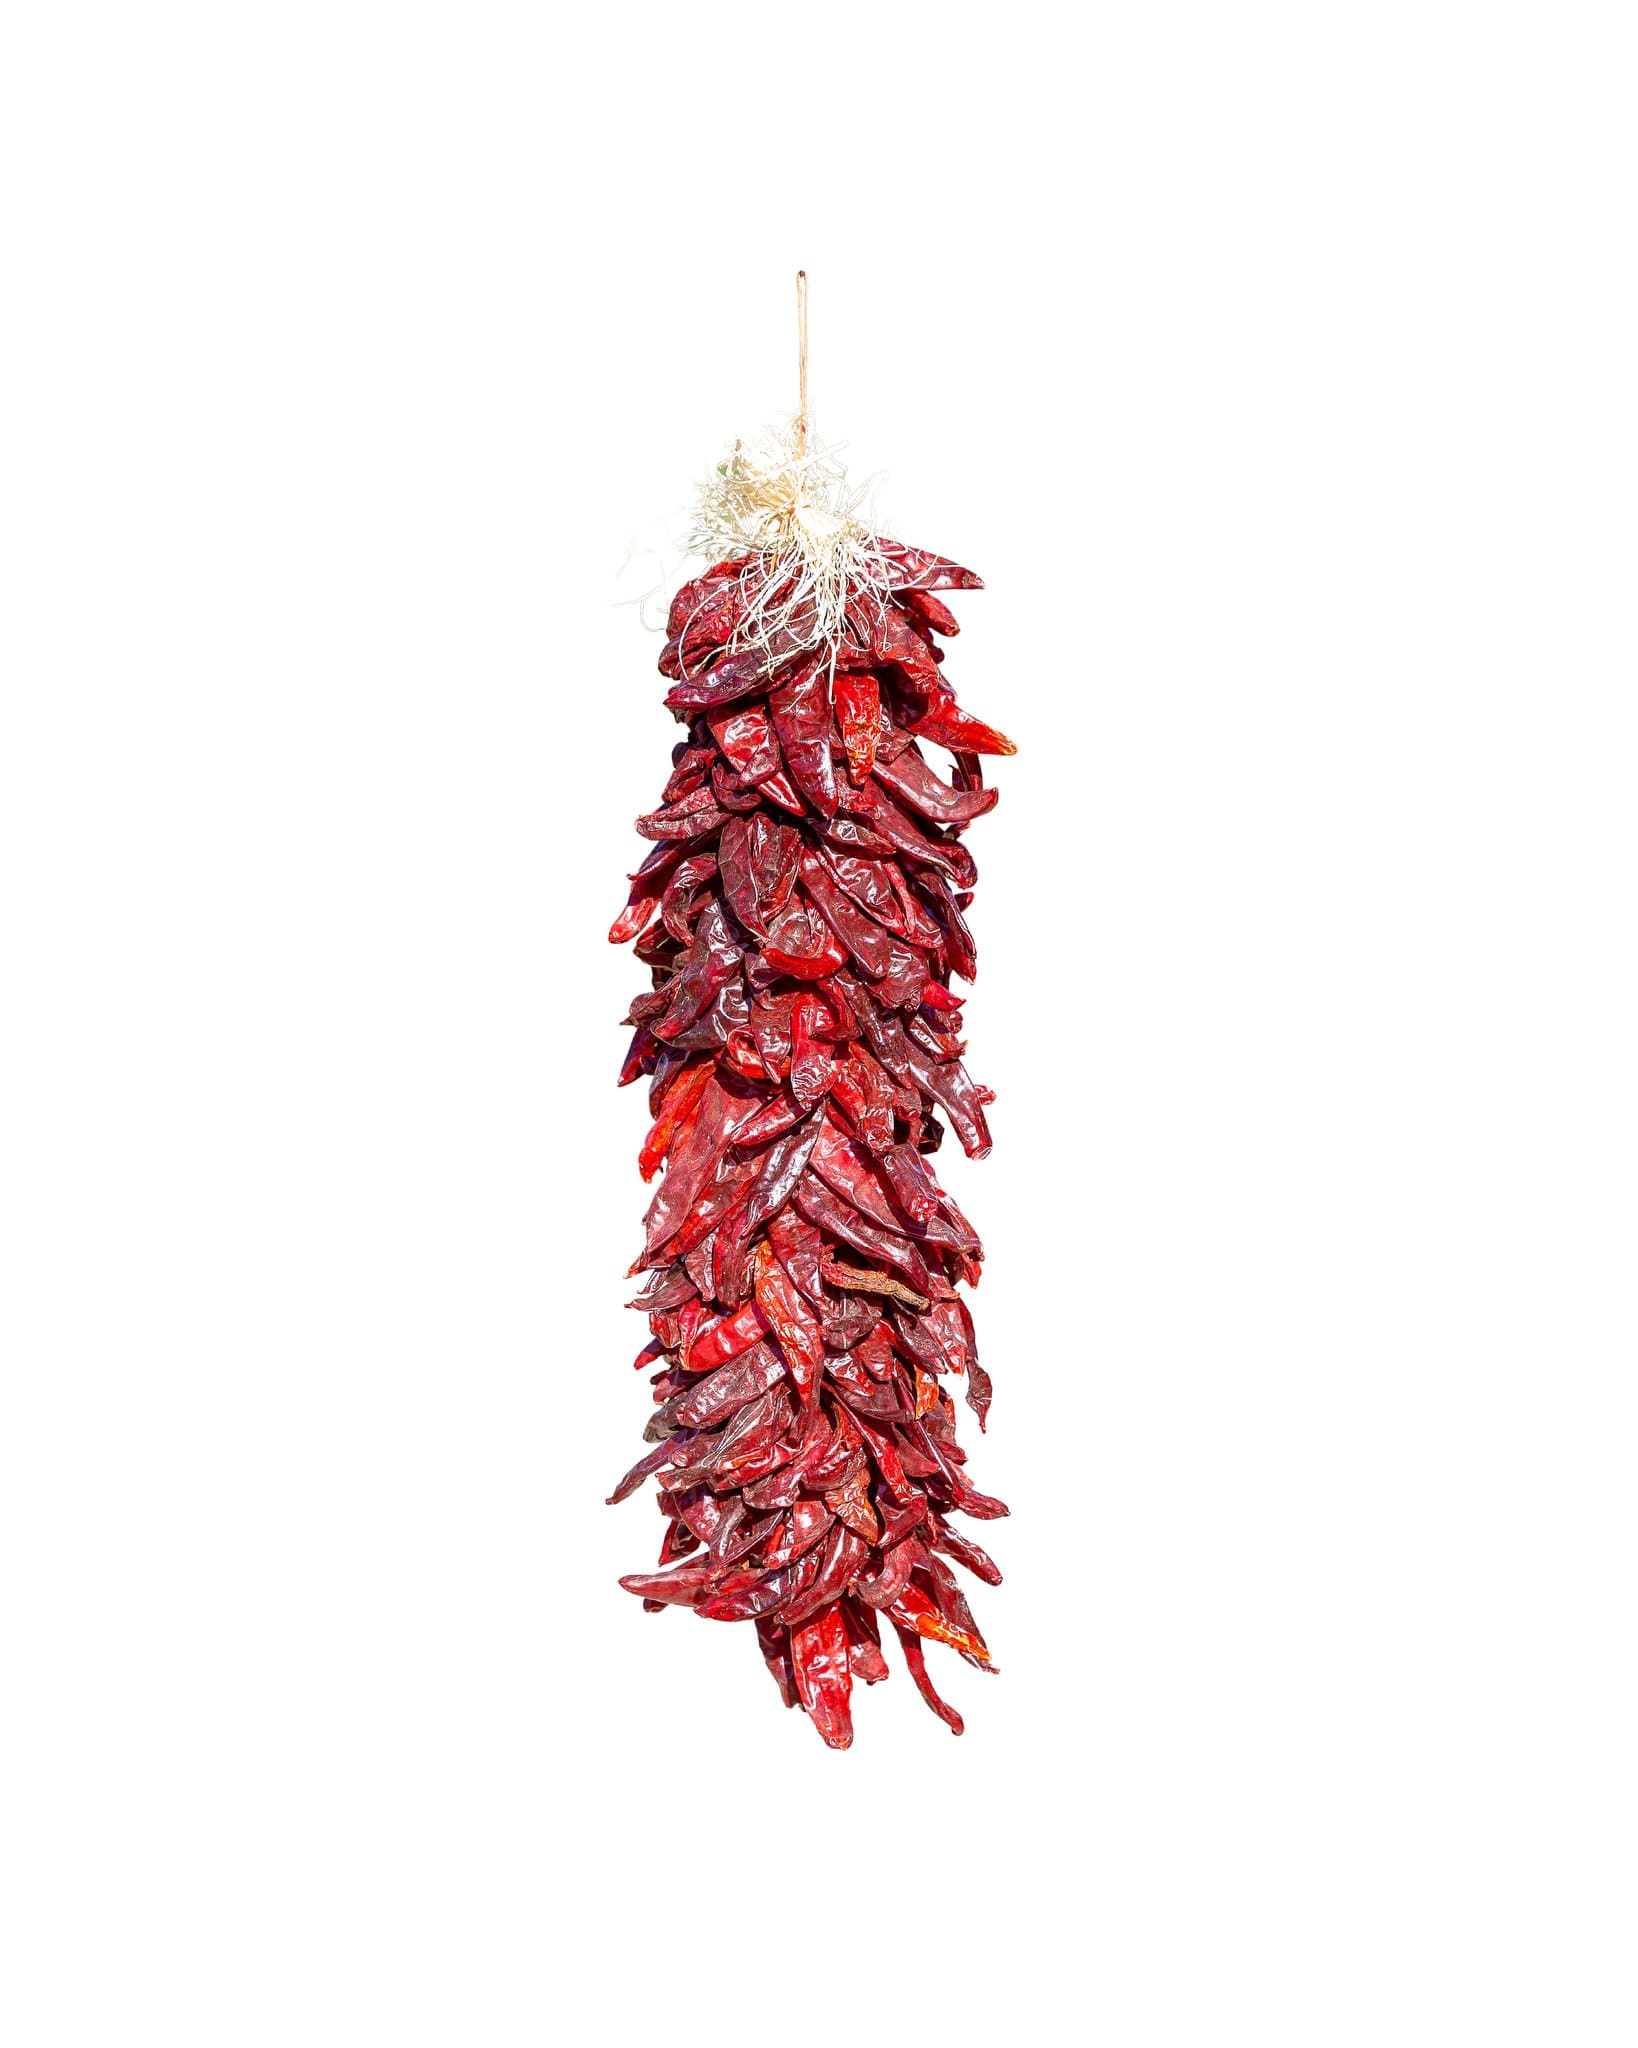 A bundle of dried Traditional Sandia Ristras tied together and hanging vertically, isolated on a white background.